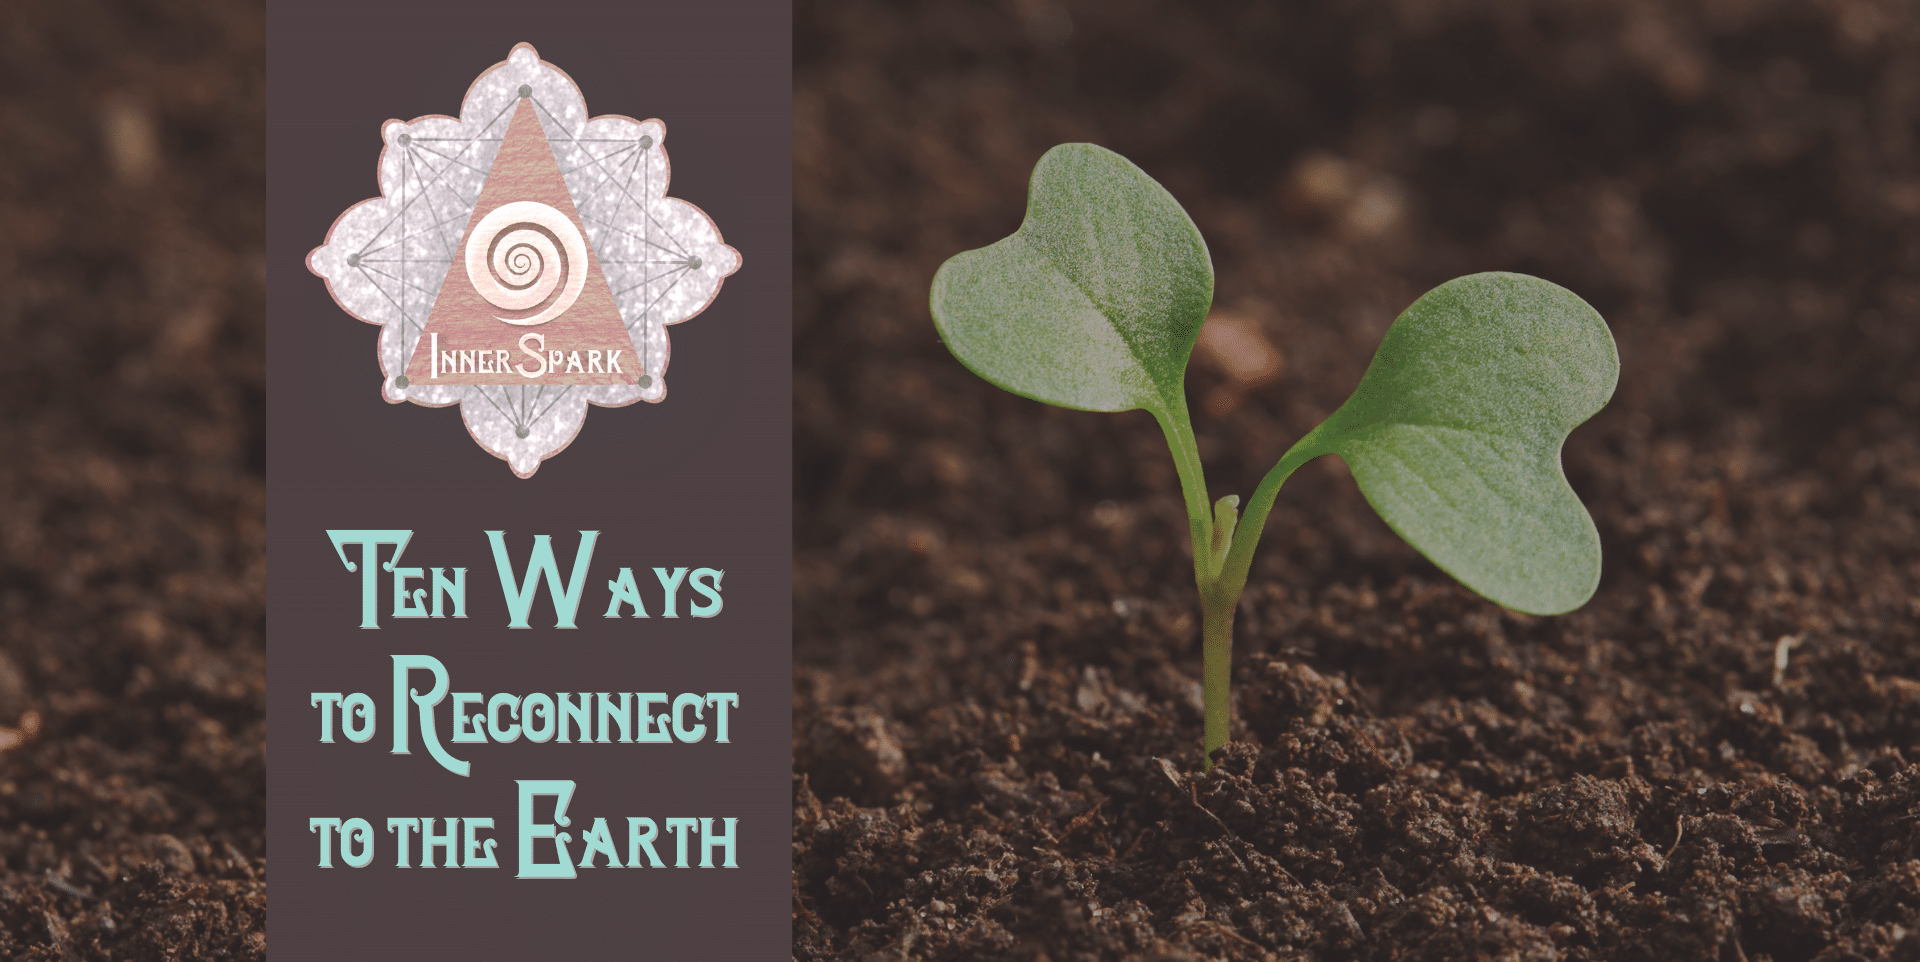 10 Ways to Reconnect to the Earth